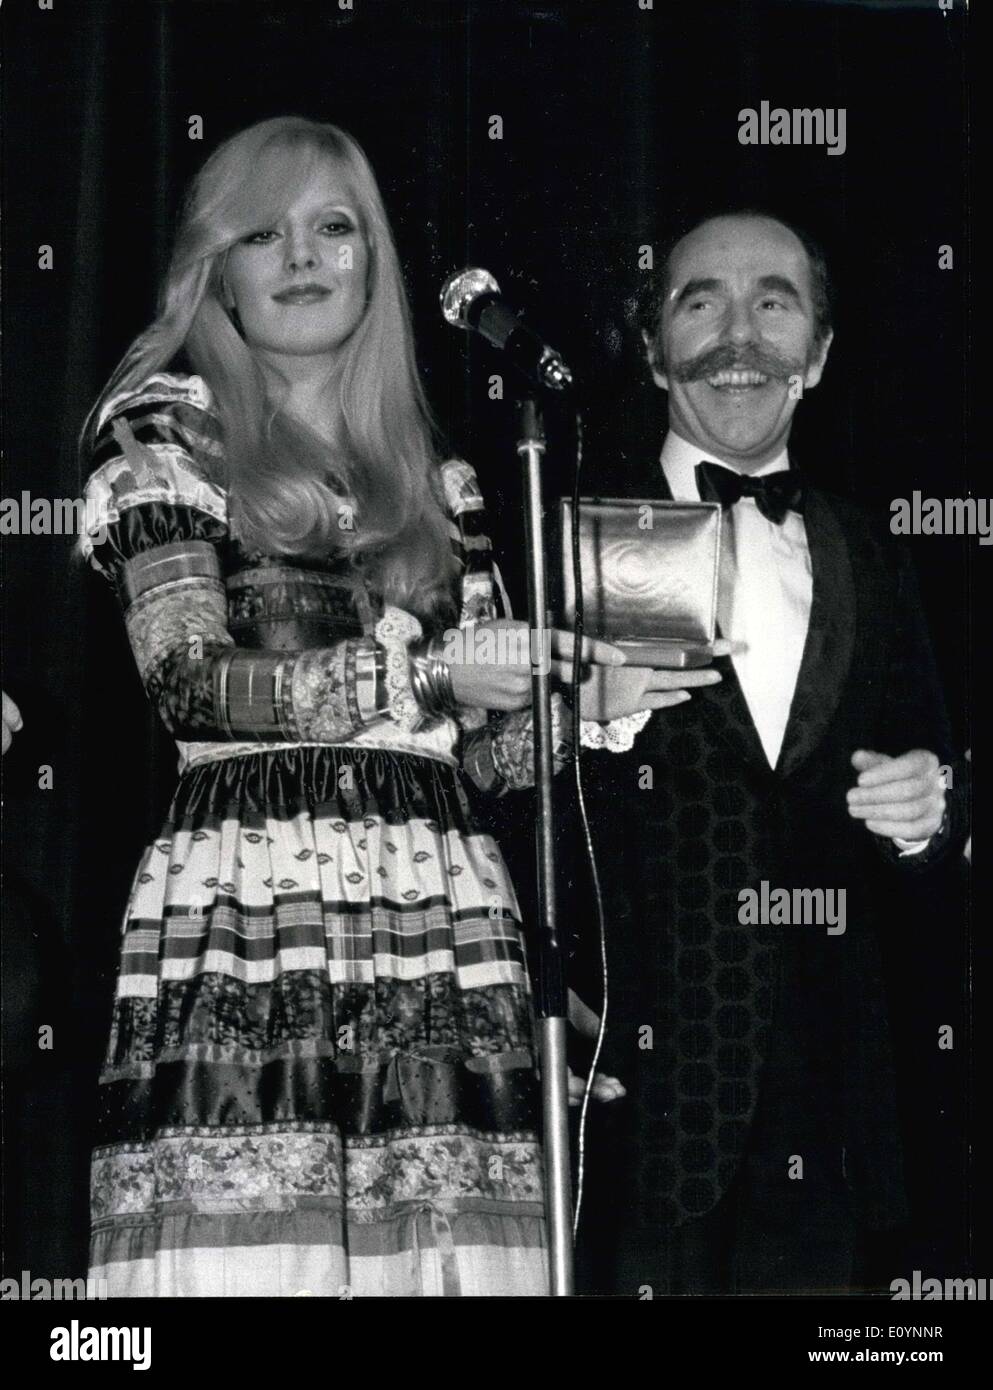 Dec. 18, 1970 - Sylvie Vartan Awarded Cinema ''Triumph'': Sylvia Vartan was one of the winners of the cinema Triumphs, French Cine Oscar Awarded at the Marigny Theatre, Paris, last night. Photo sows Sylve Vartan pictured ith her ''Triumph'' on right Jean Paul Rouland, French Comedian. Stock Photo